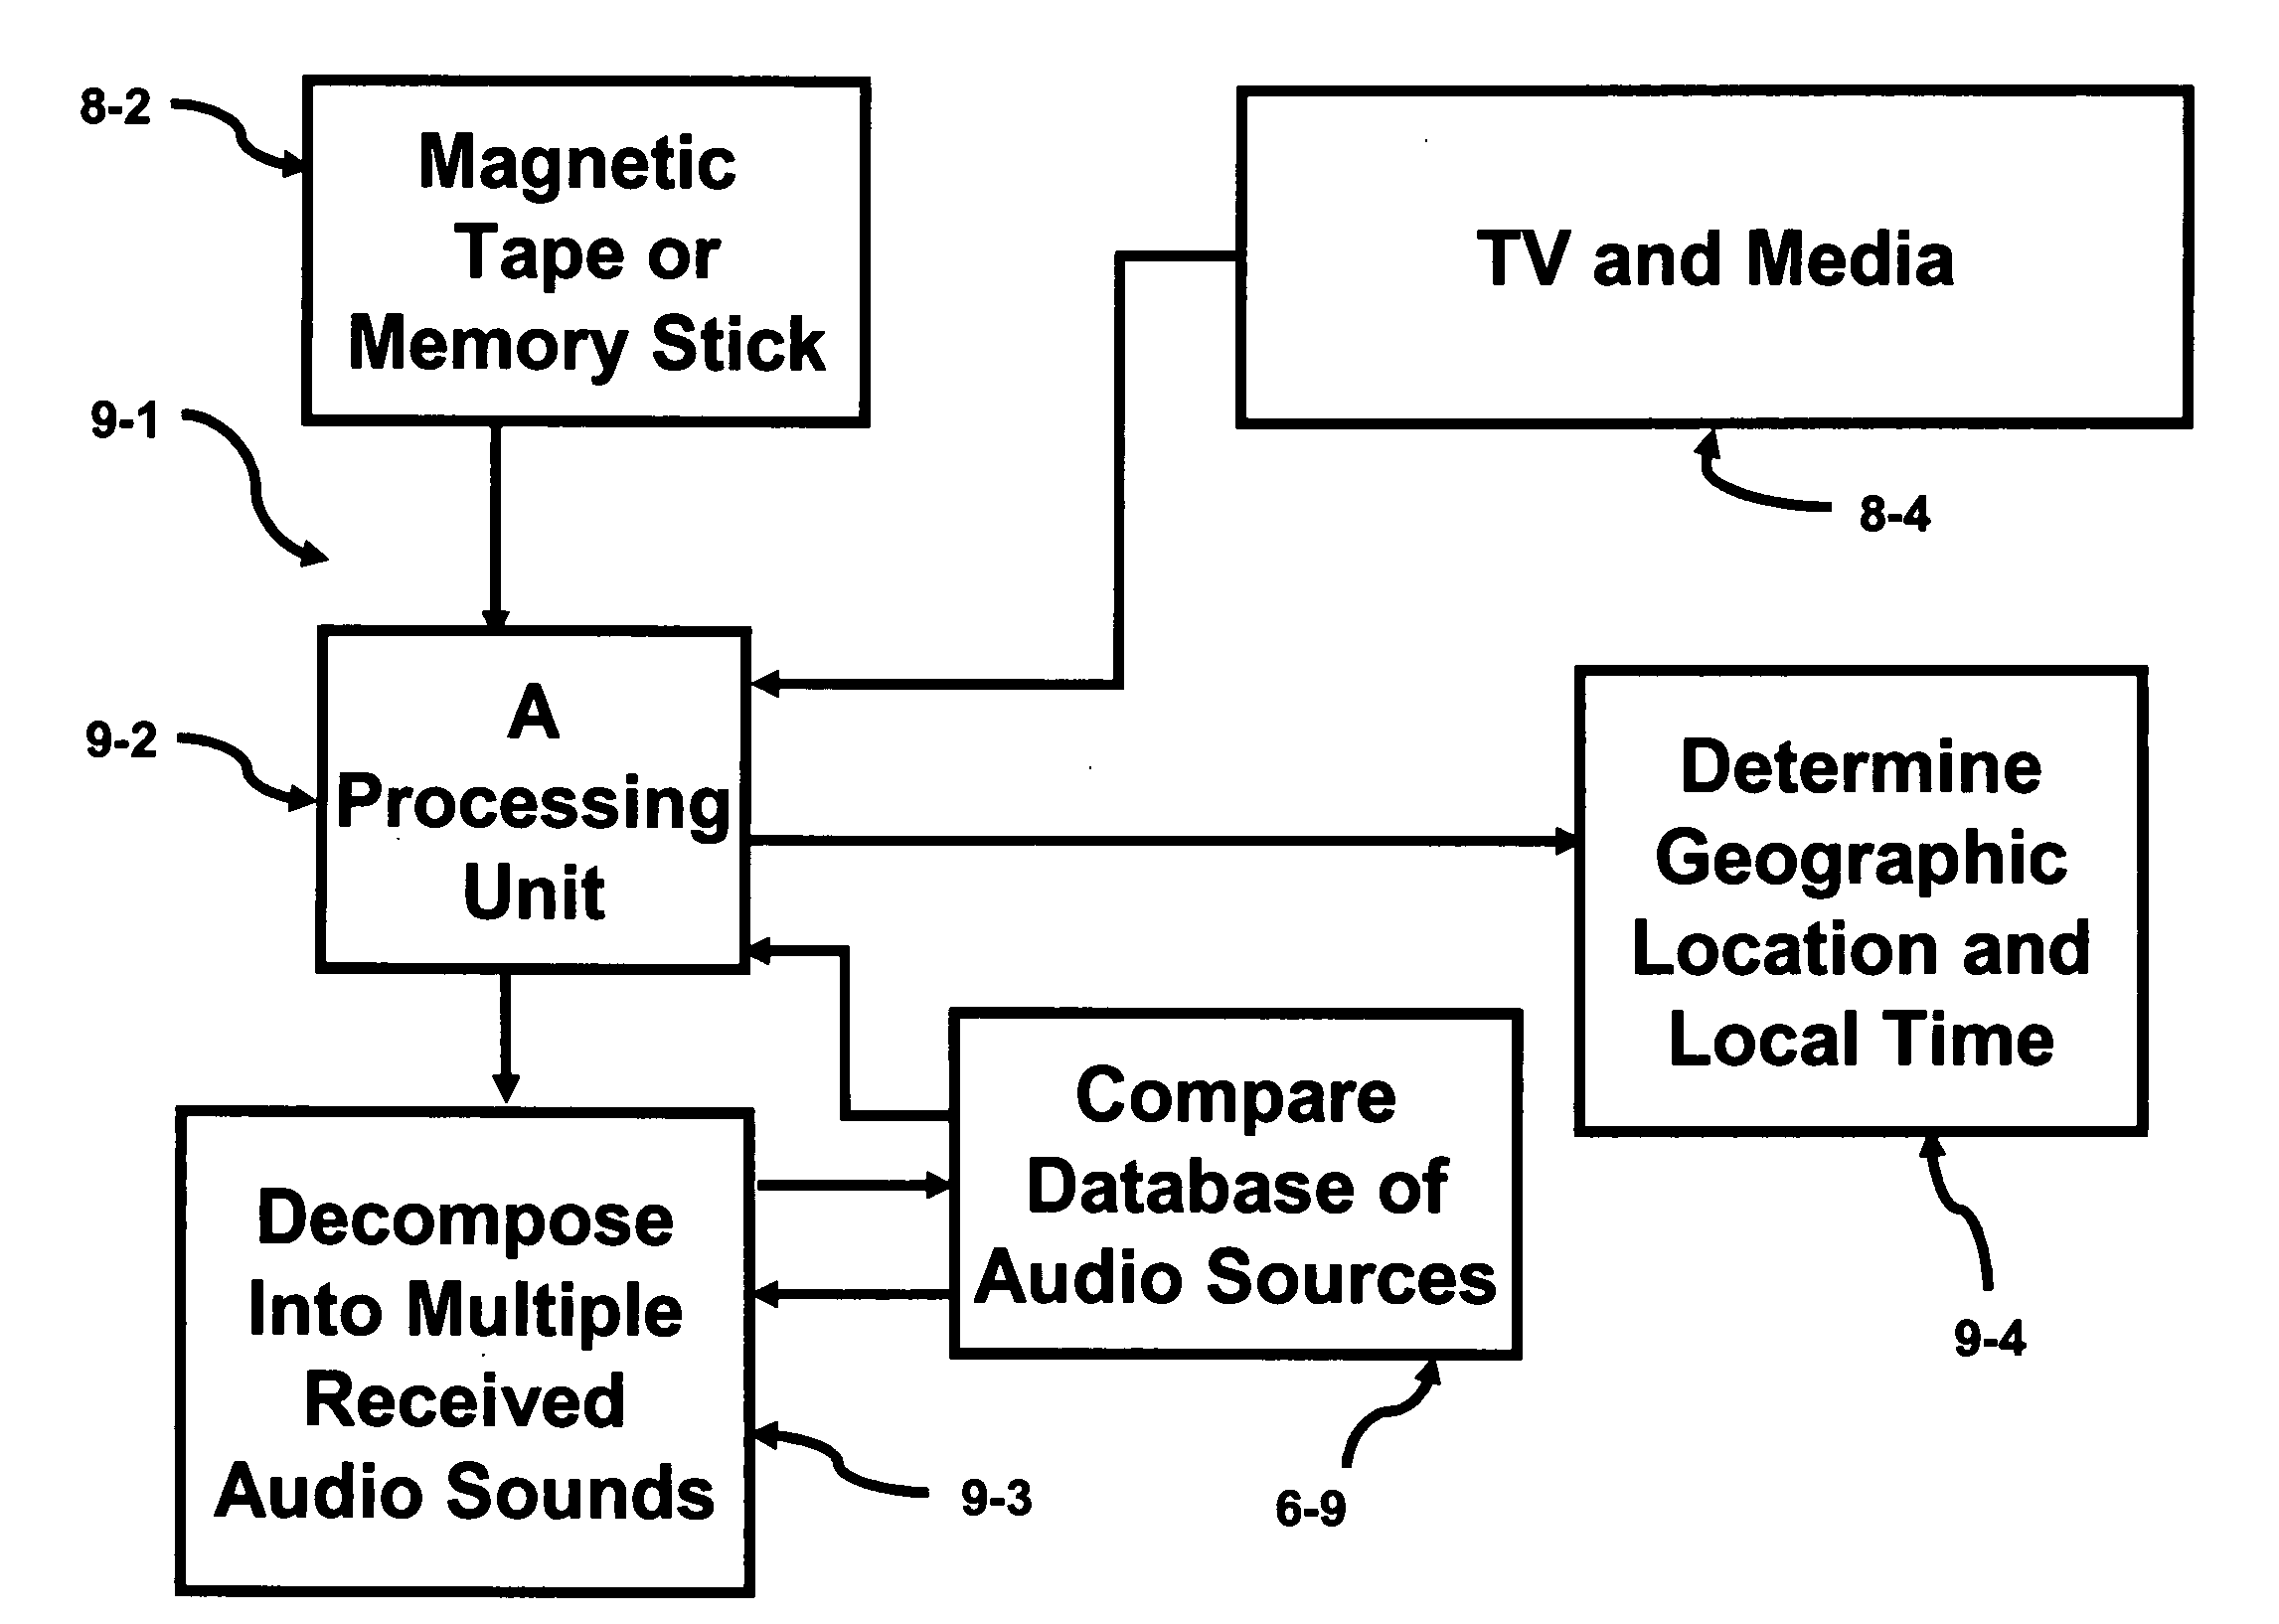 Apparatus and method for indentifying the geographic location and time in a recorded sound track by using a stealth mode technique